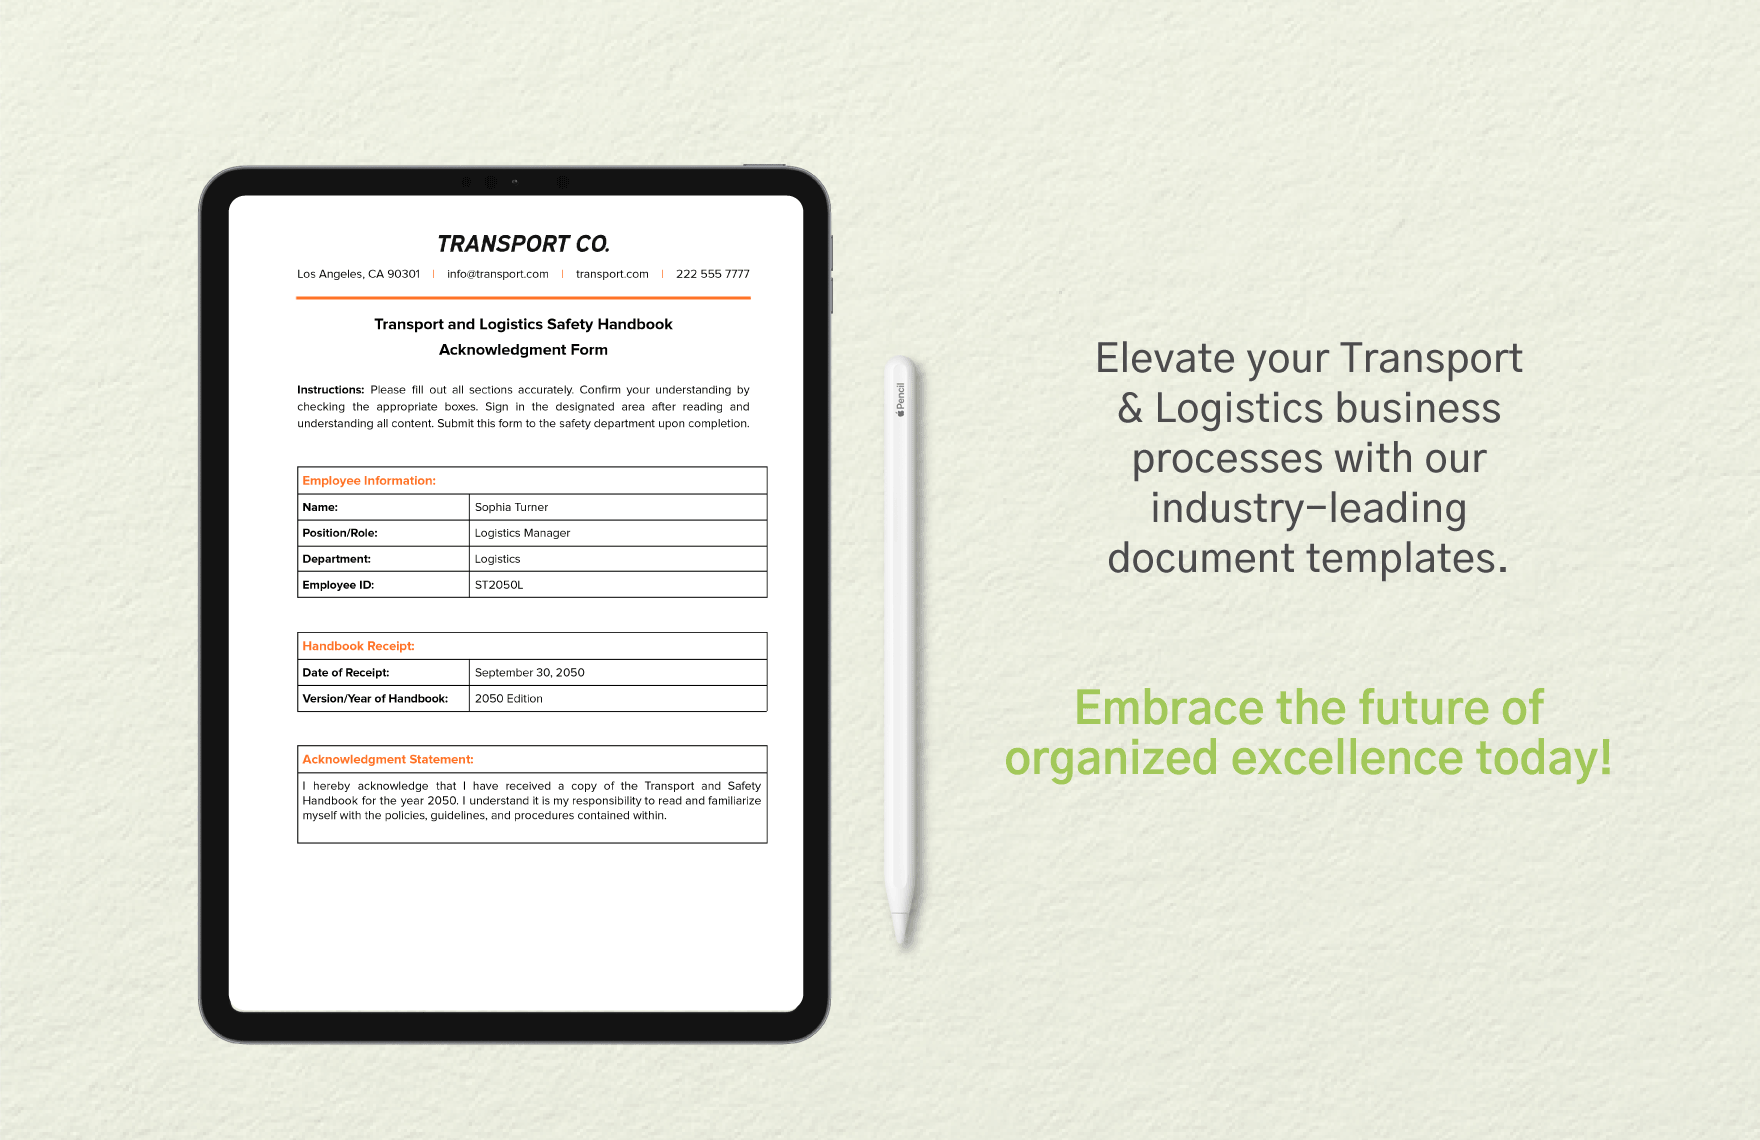 Transport and Logistics Safety Handbook Acknowledgment Form Template